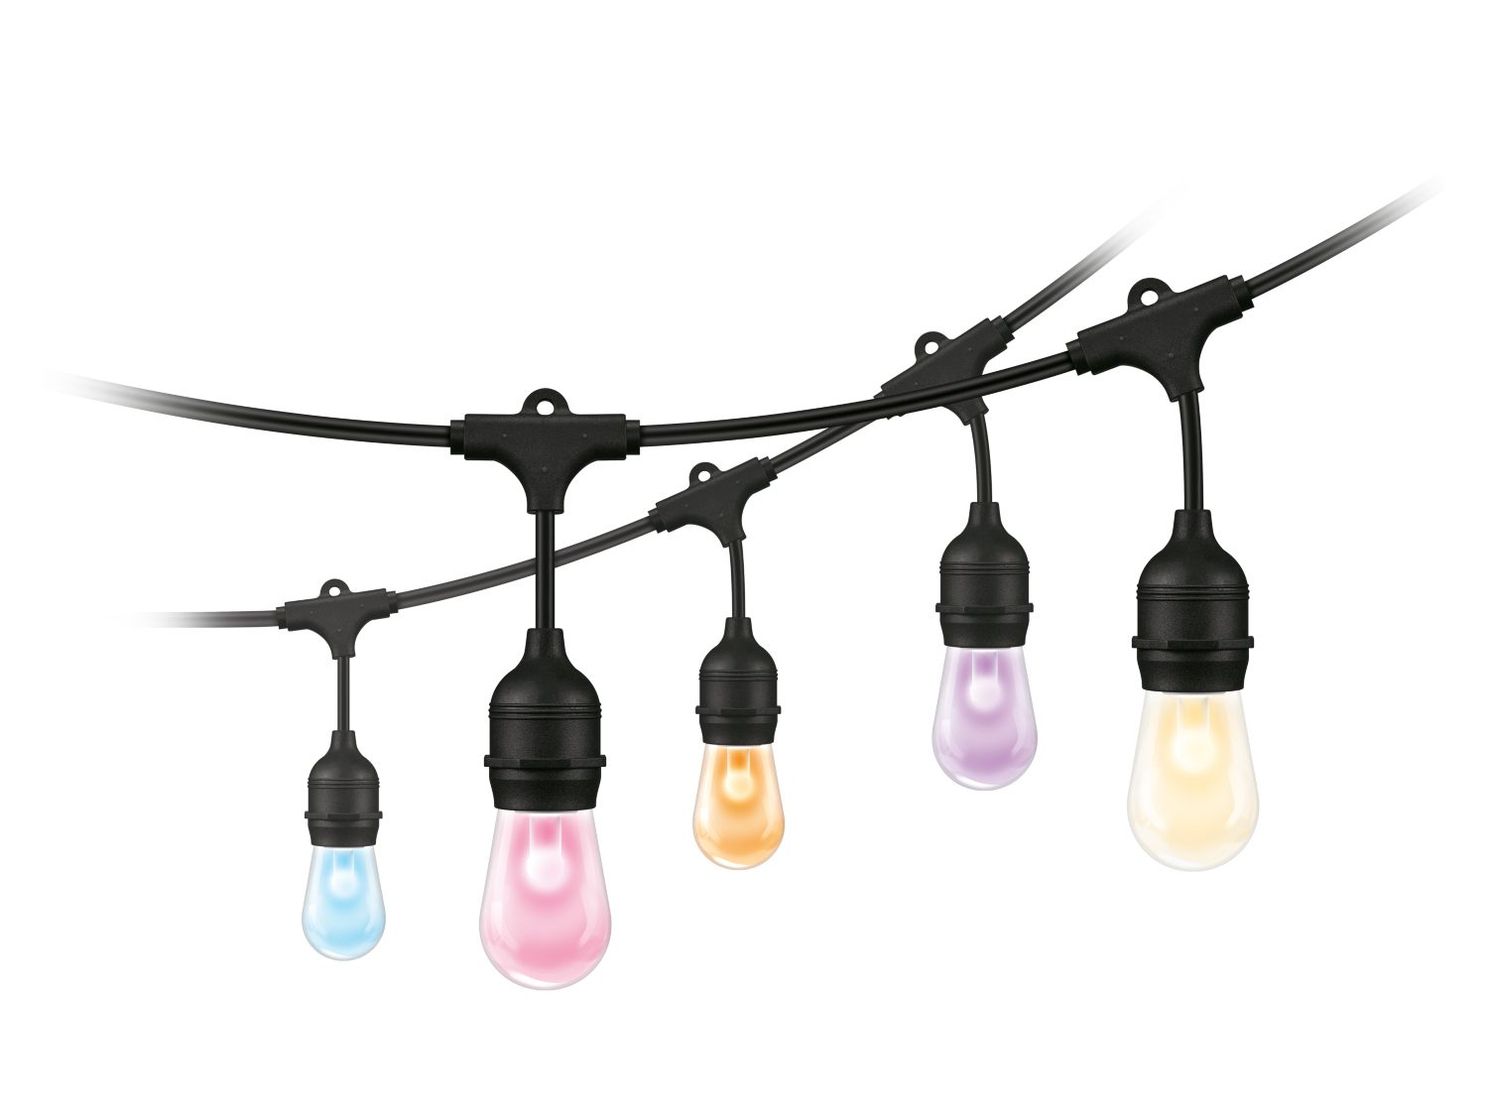 AW Advent calendar 2022 day 6: Win the smart WiZ light cord for indoors and outdoors!